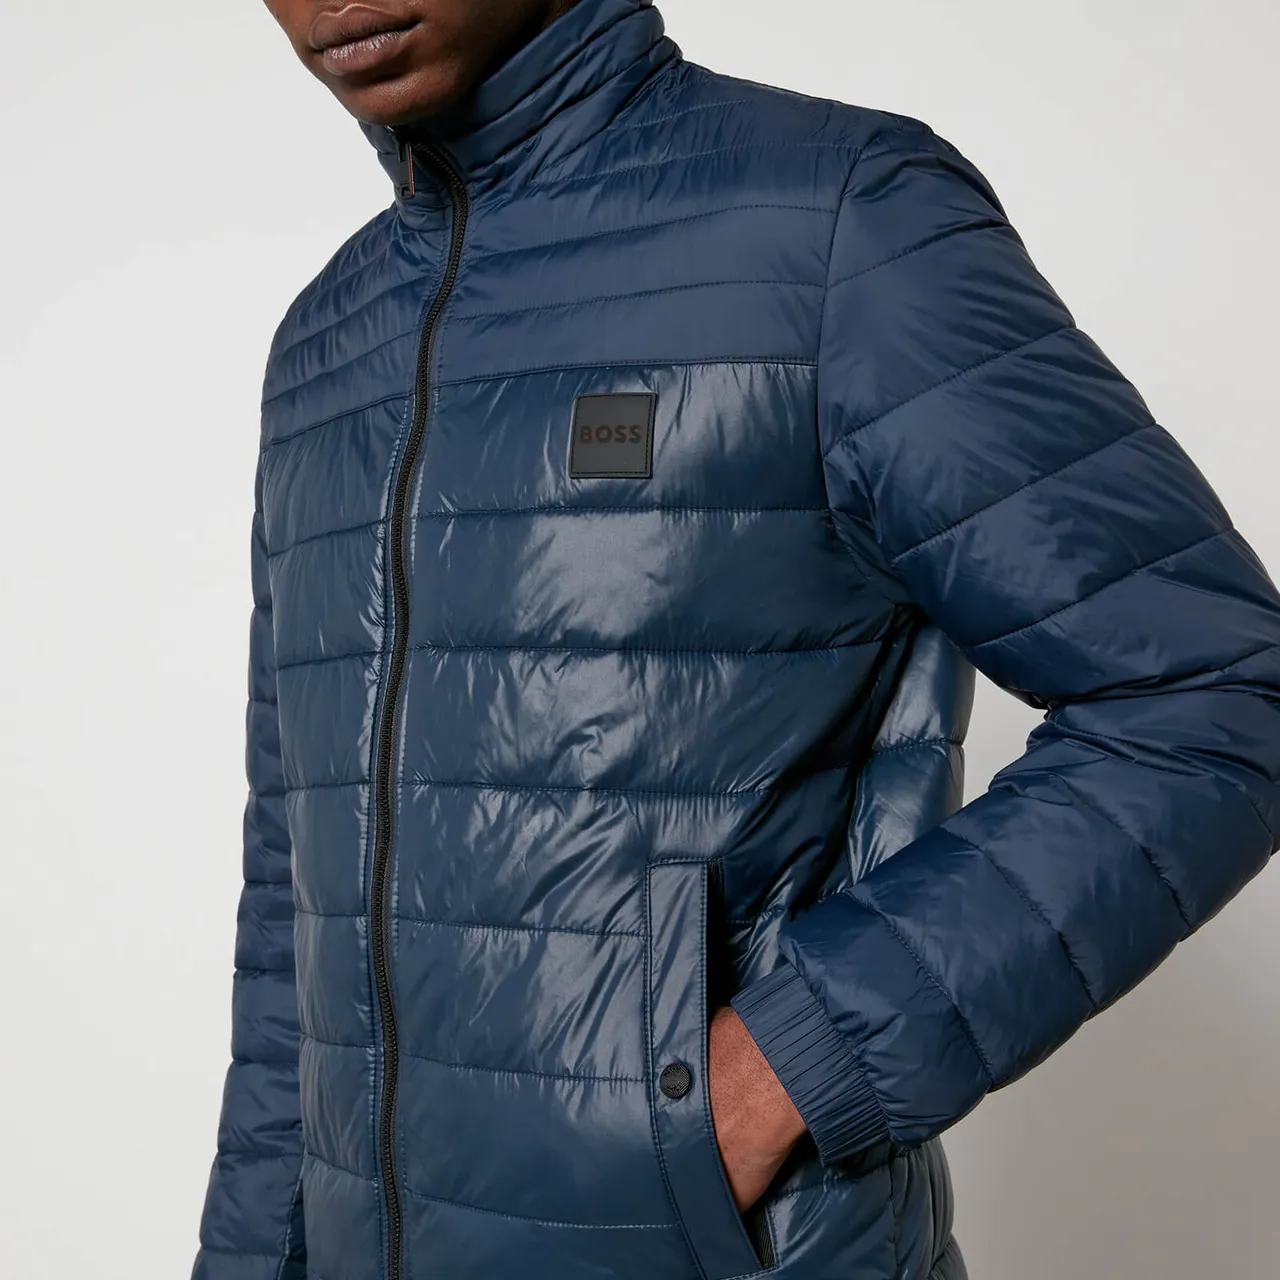 BOSS Orange Oden Recycled Quilted Shell Jacket - IT 46/